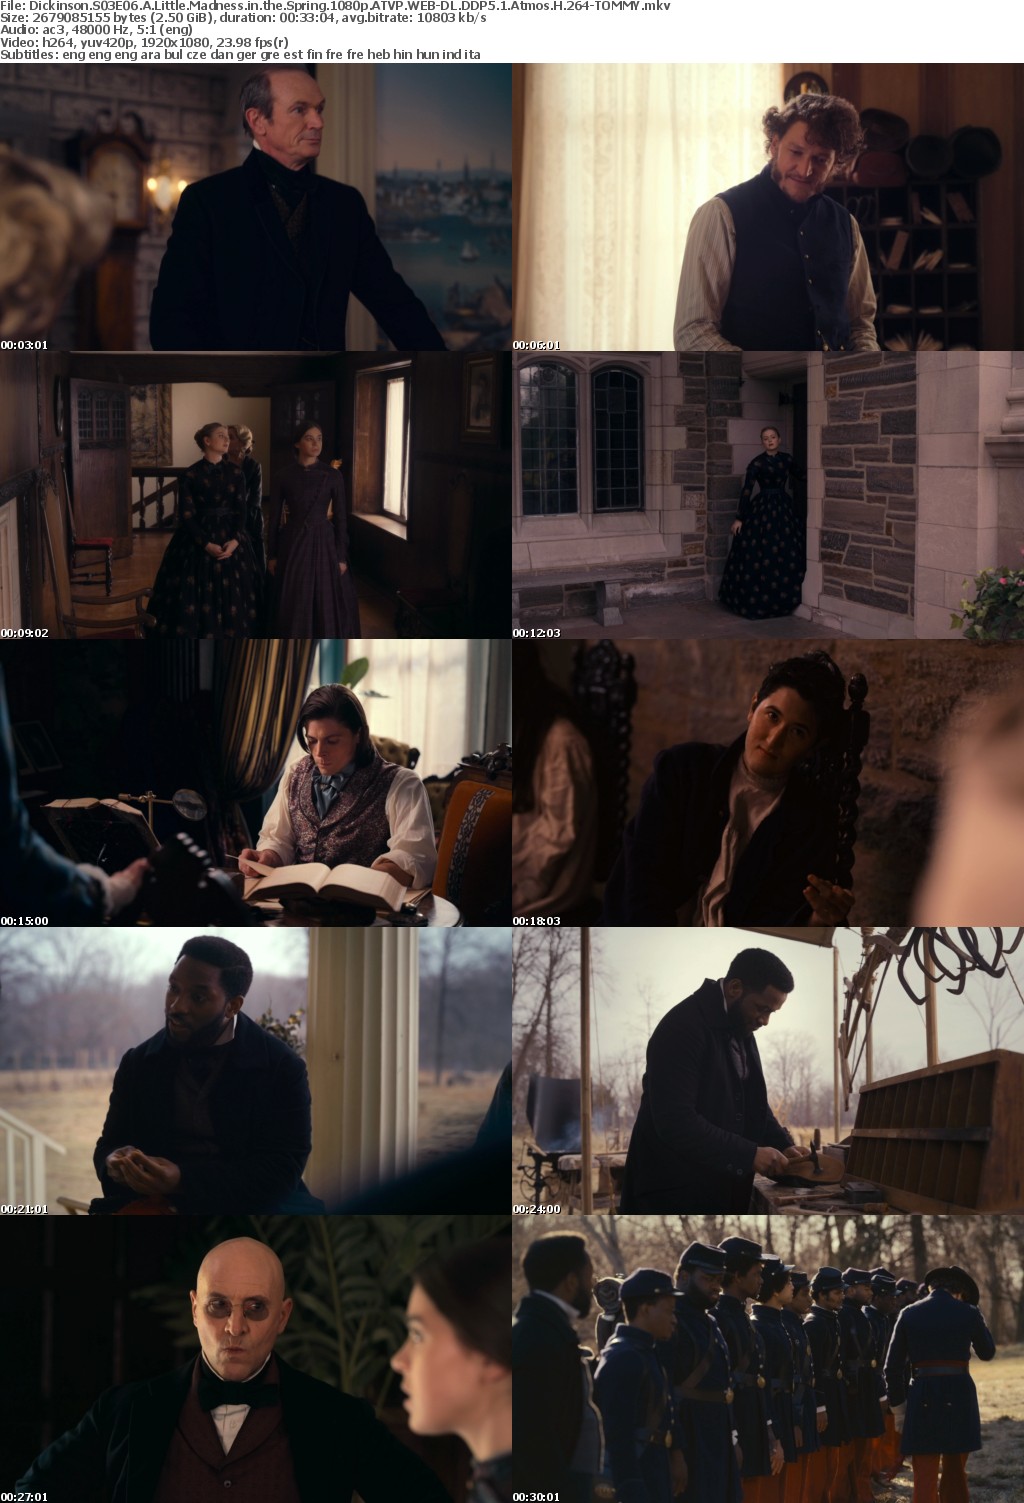 Dickinson S03E06 A Little Madness in the Spring 1080p ATVP WEBRip DDP5 1 x264-TOMMY